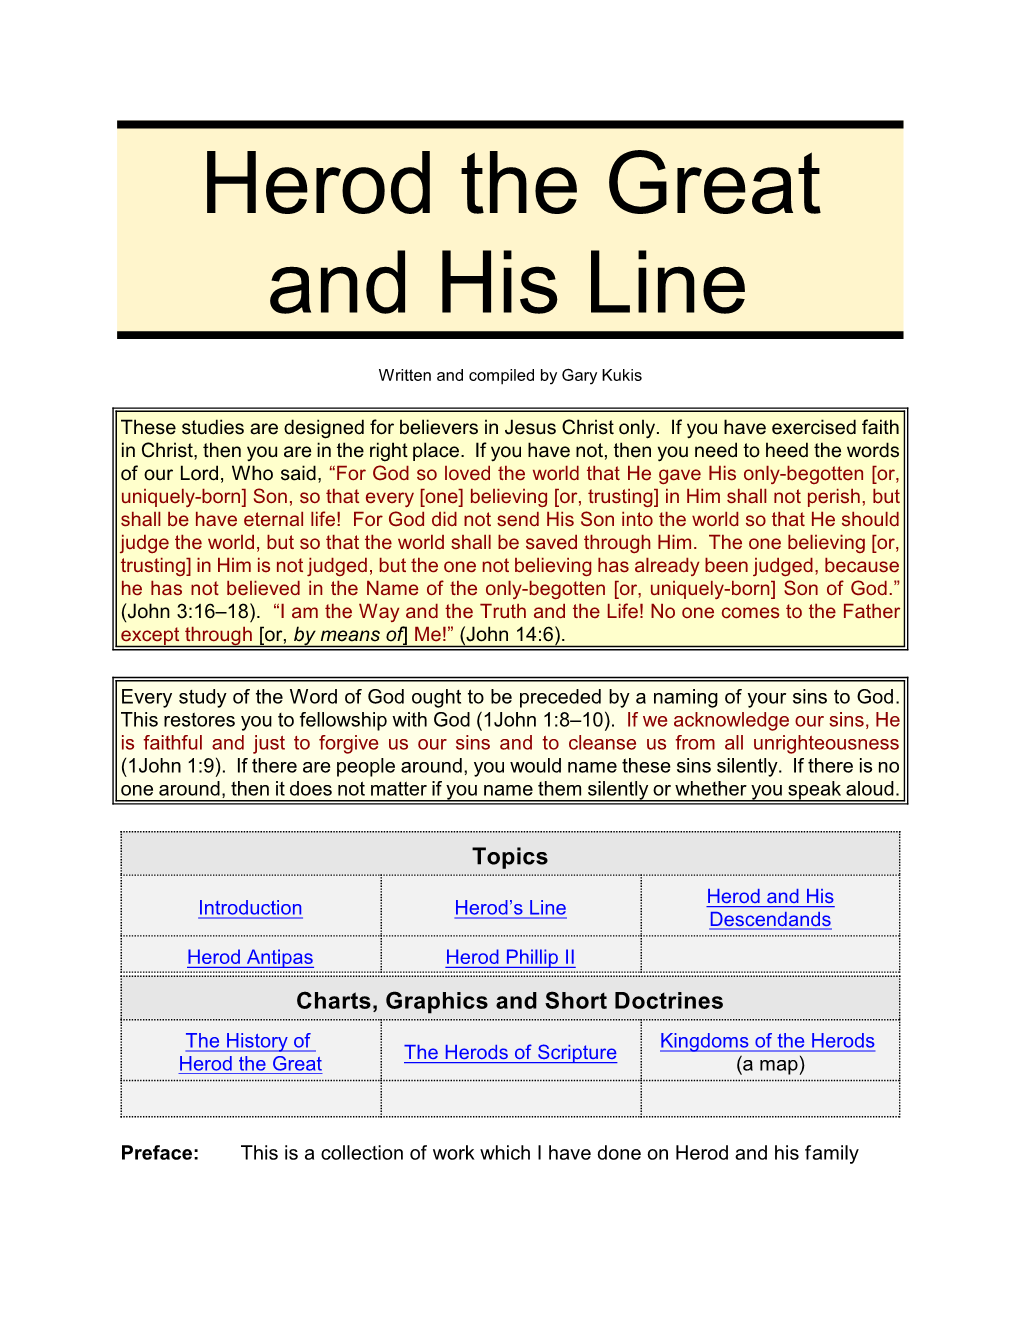 Herod and His Line